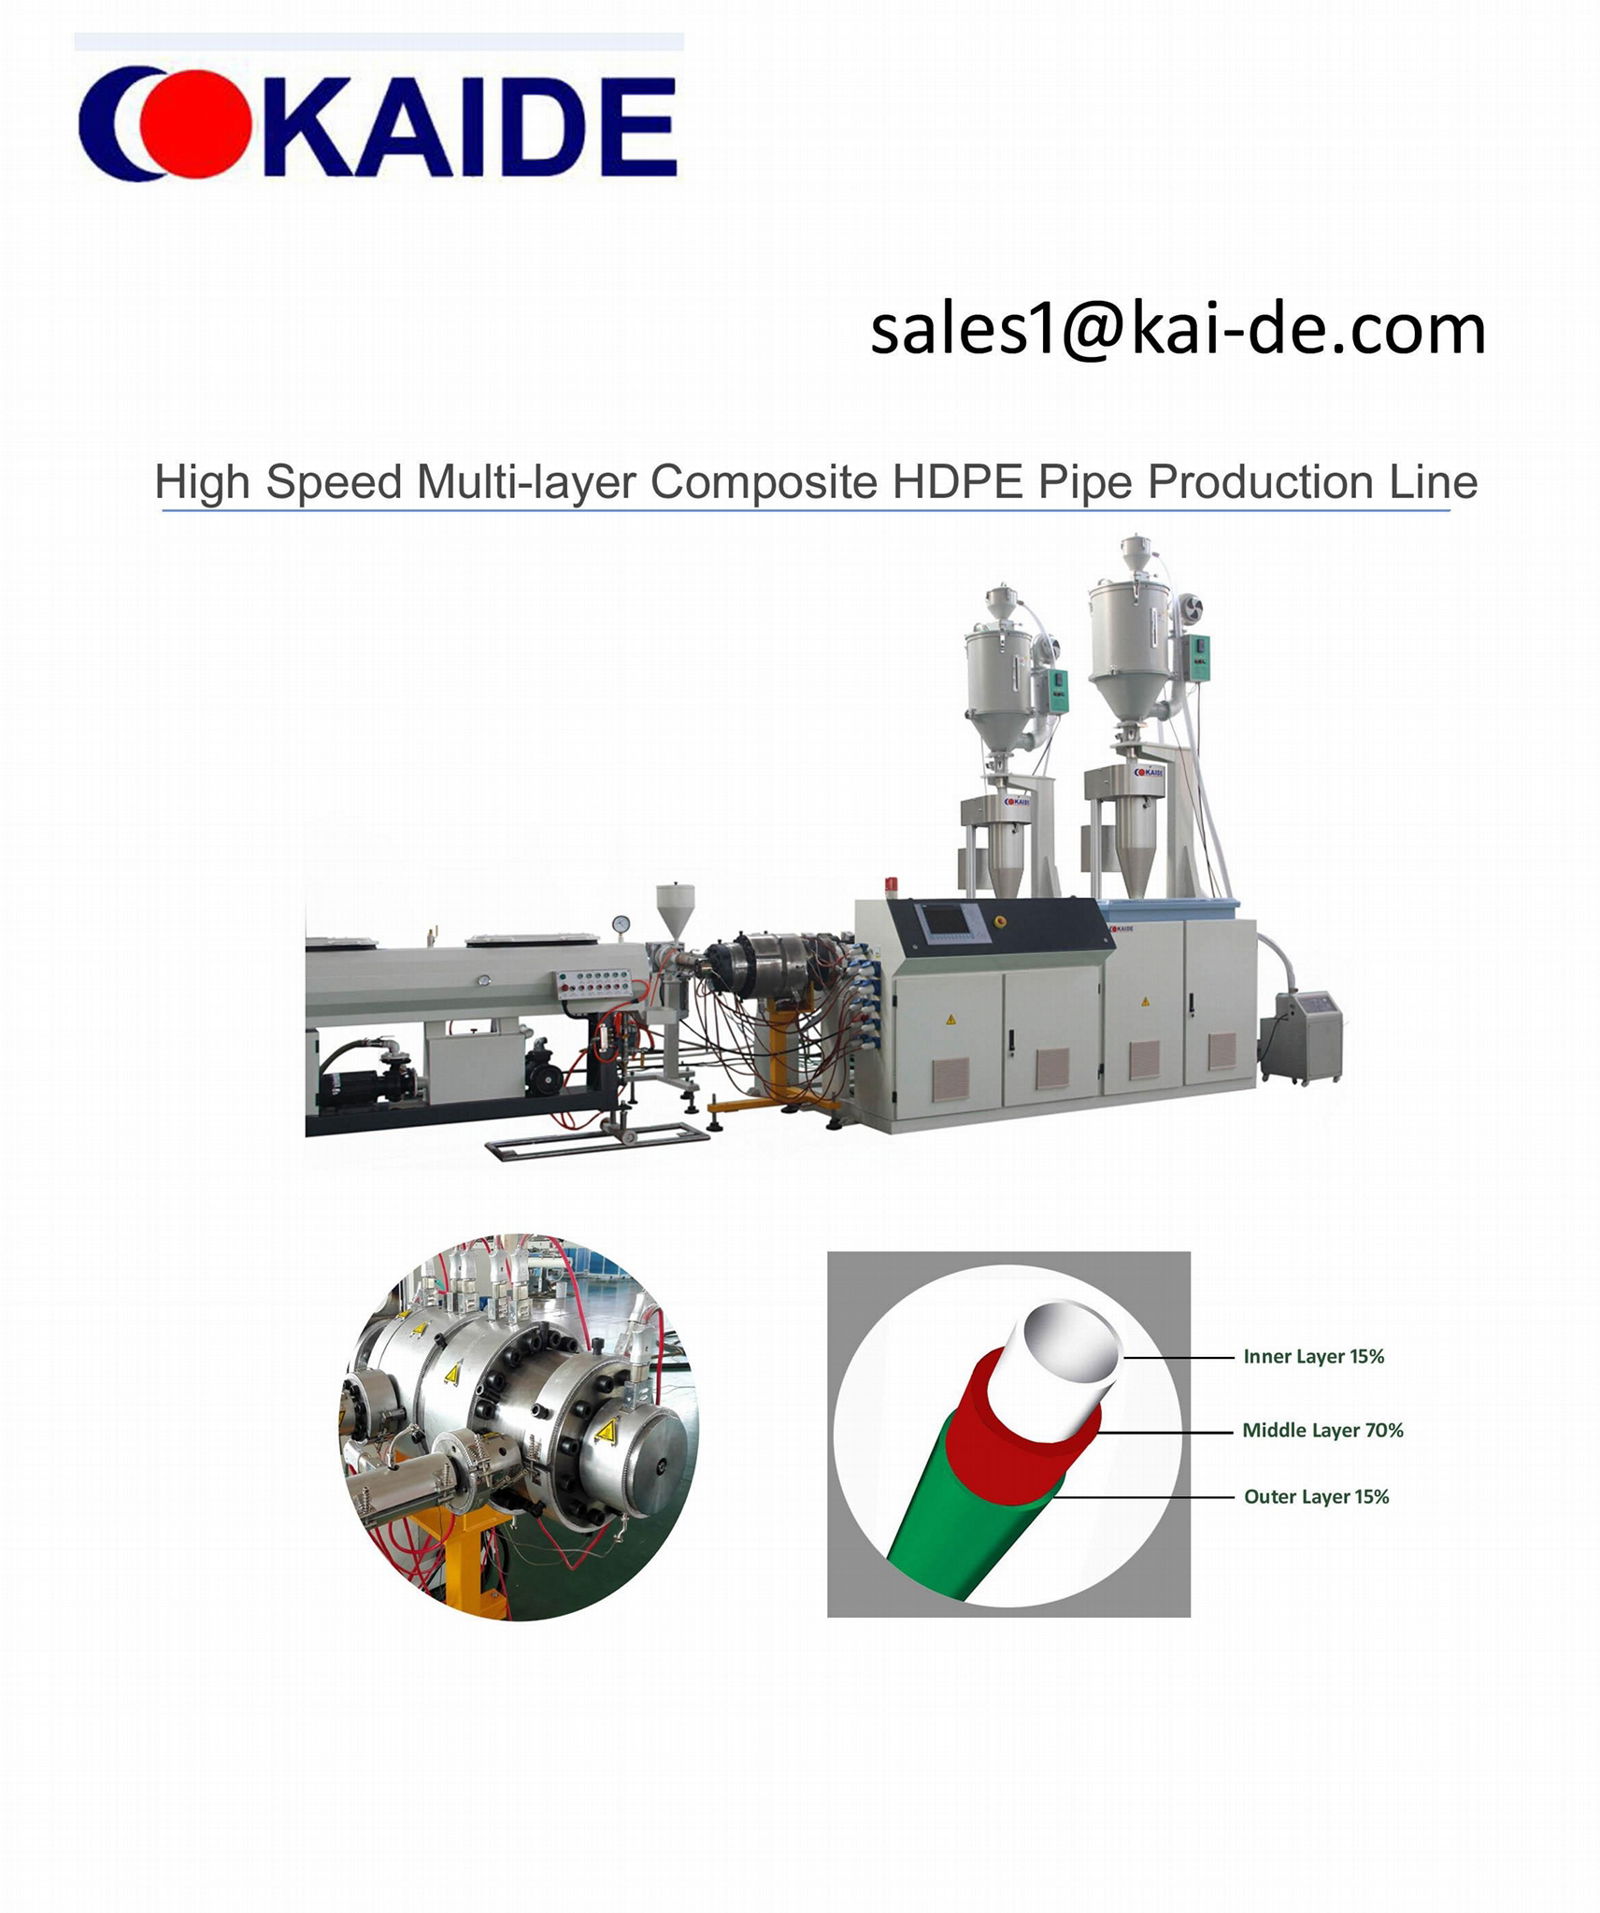 High Speed Multi-layer Composite HDPE Pipe Production Line